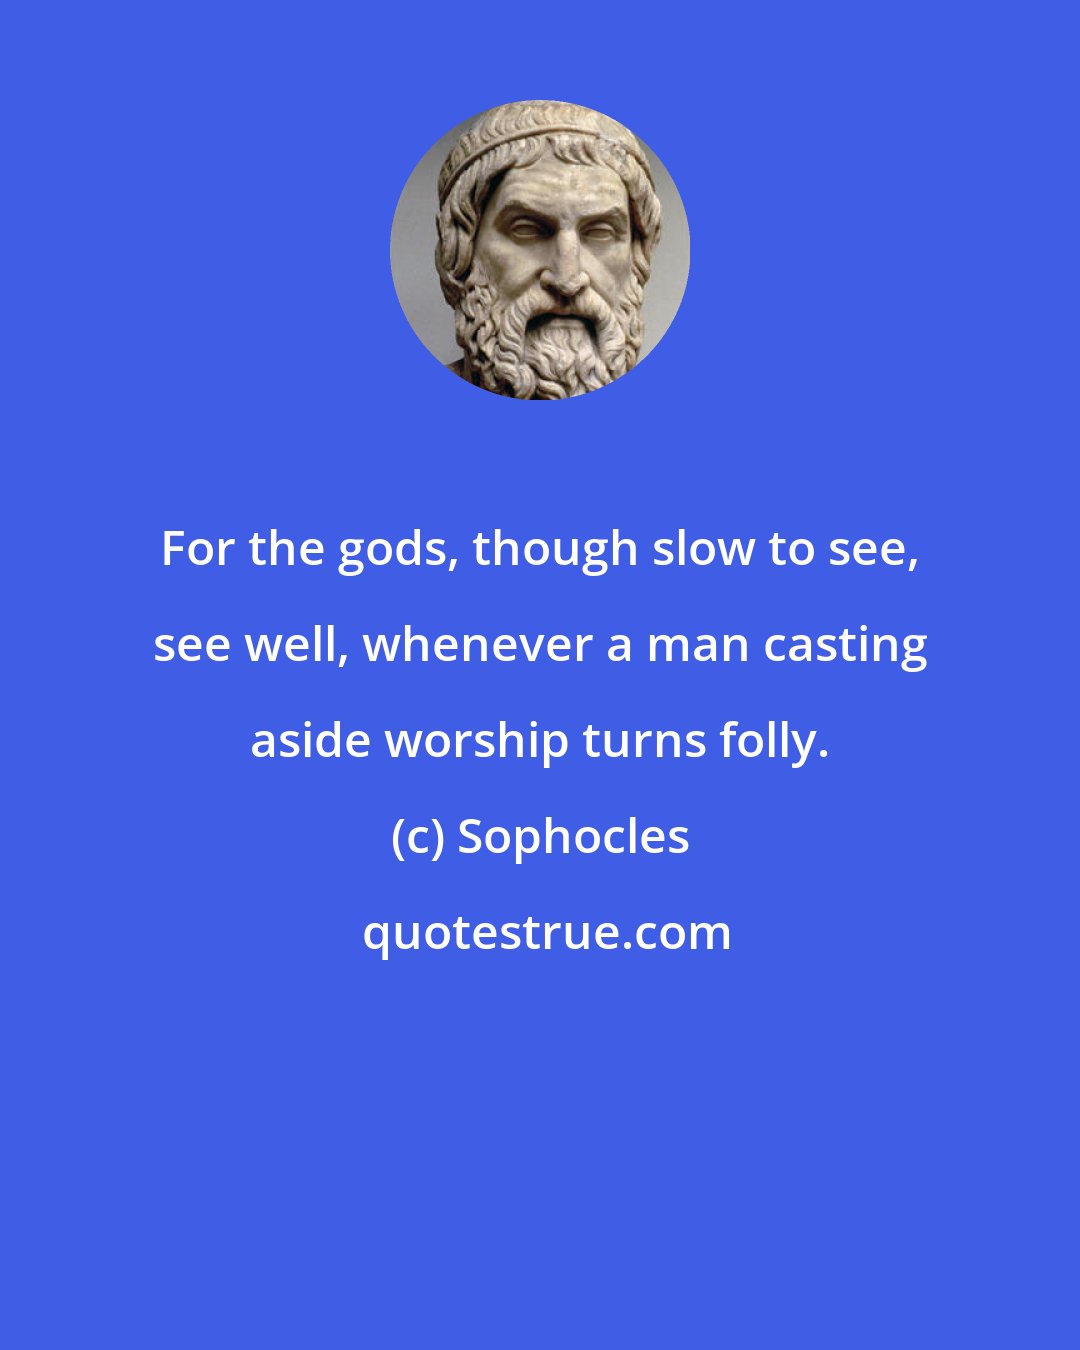 Sophocles: For the gods, though slow to see, see well, whenever a man casting aside worship turns folly.